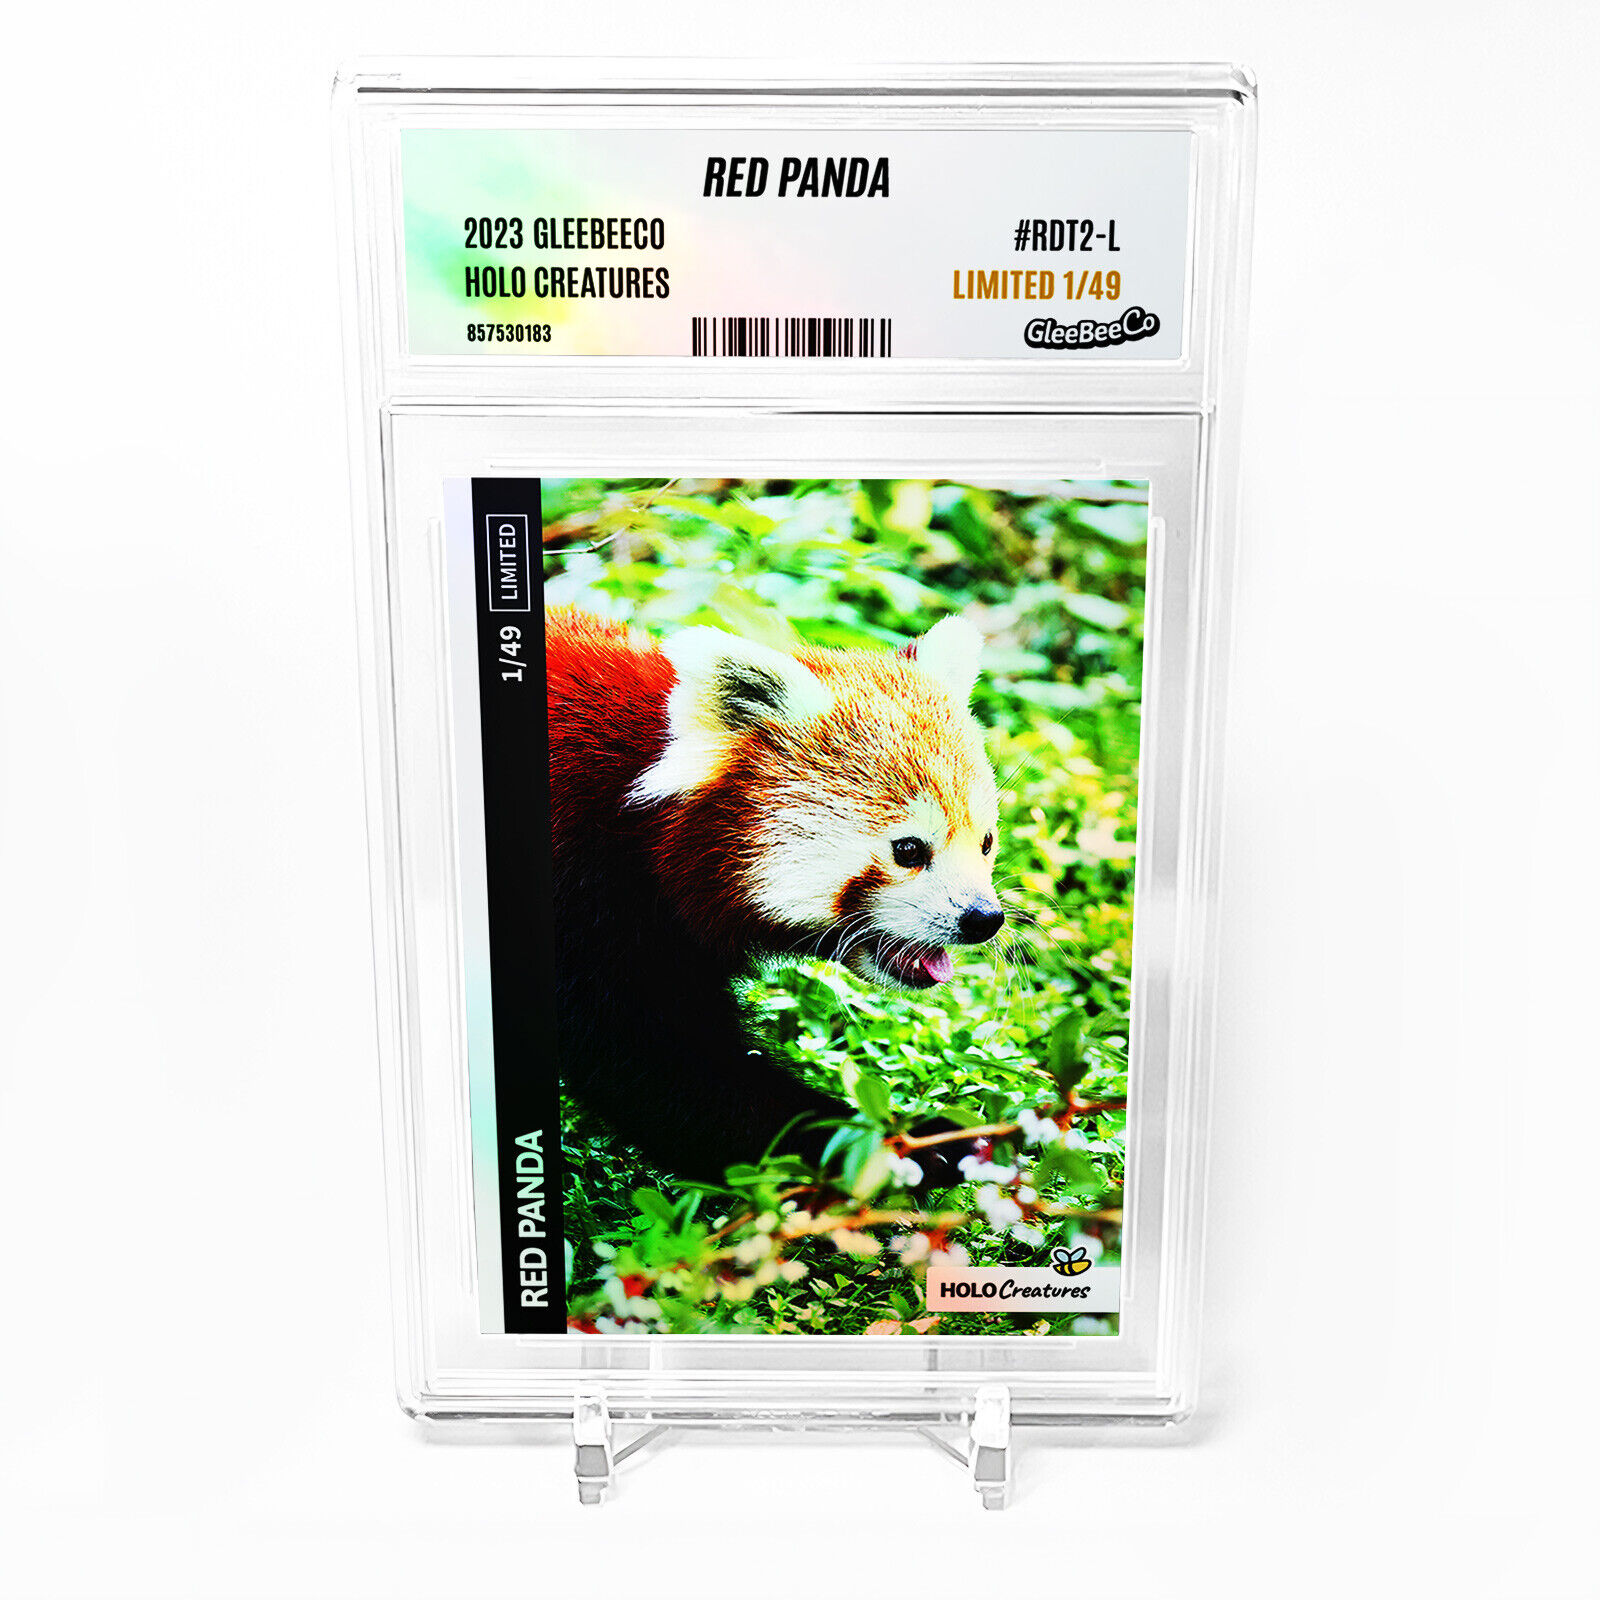 RED PANDA Holographic Card 2023 GleeBeeCo On the Prowl #RDT2-L LIMITED to /49